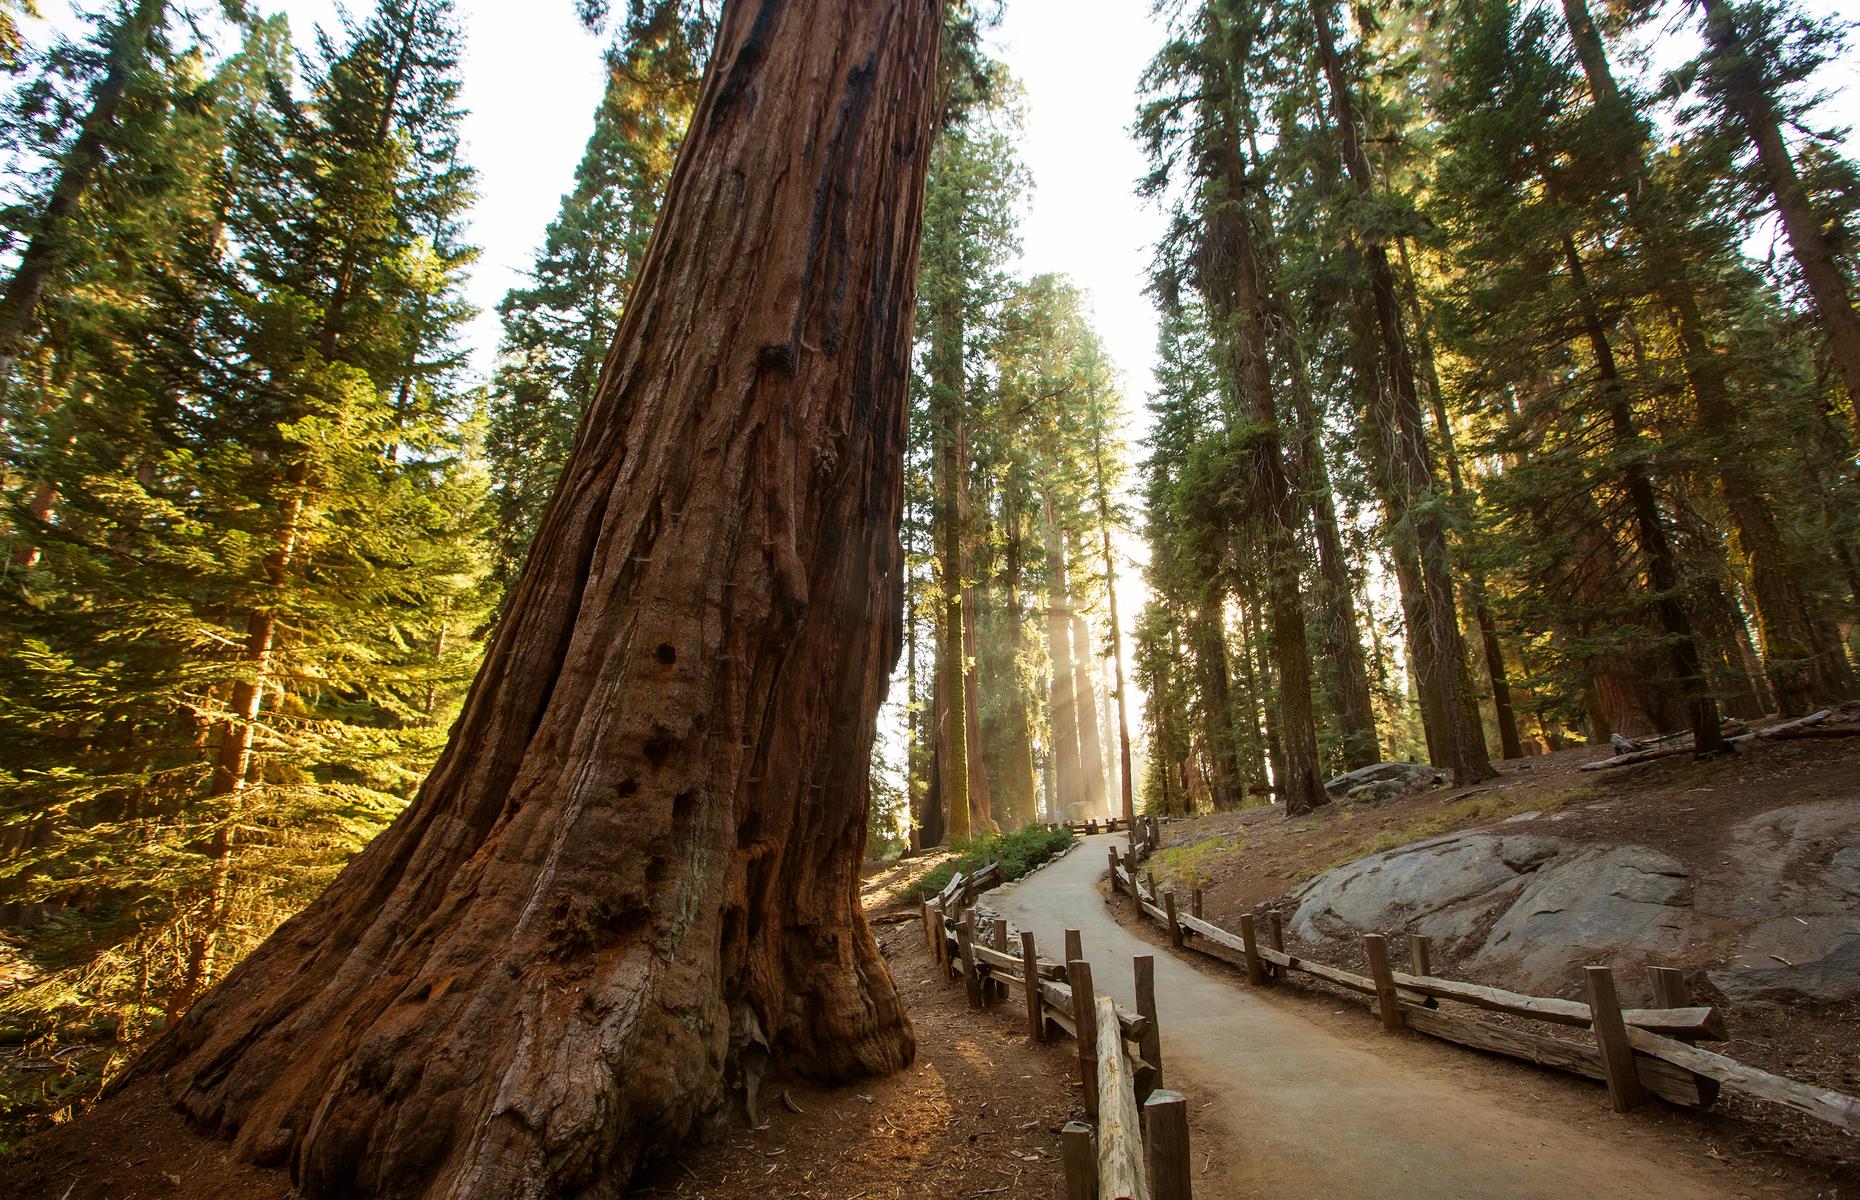 <p>Enter the land of the giants at Sequoia National Park – home to the ginormous sequoia trees – on a road trip through California. The vast state is a place for big adventures with little ones: whether it's visiting the fabulous amusement parks near LA, star-spotting in Hollywood, sea lion spotting on the Big Sur or hearing the call of the wild in Yosemite National Park, there is something to keep everyone in the family enthralled. </p>